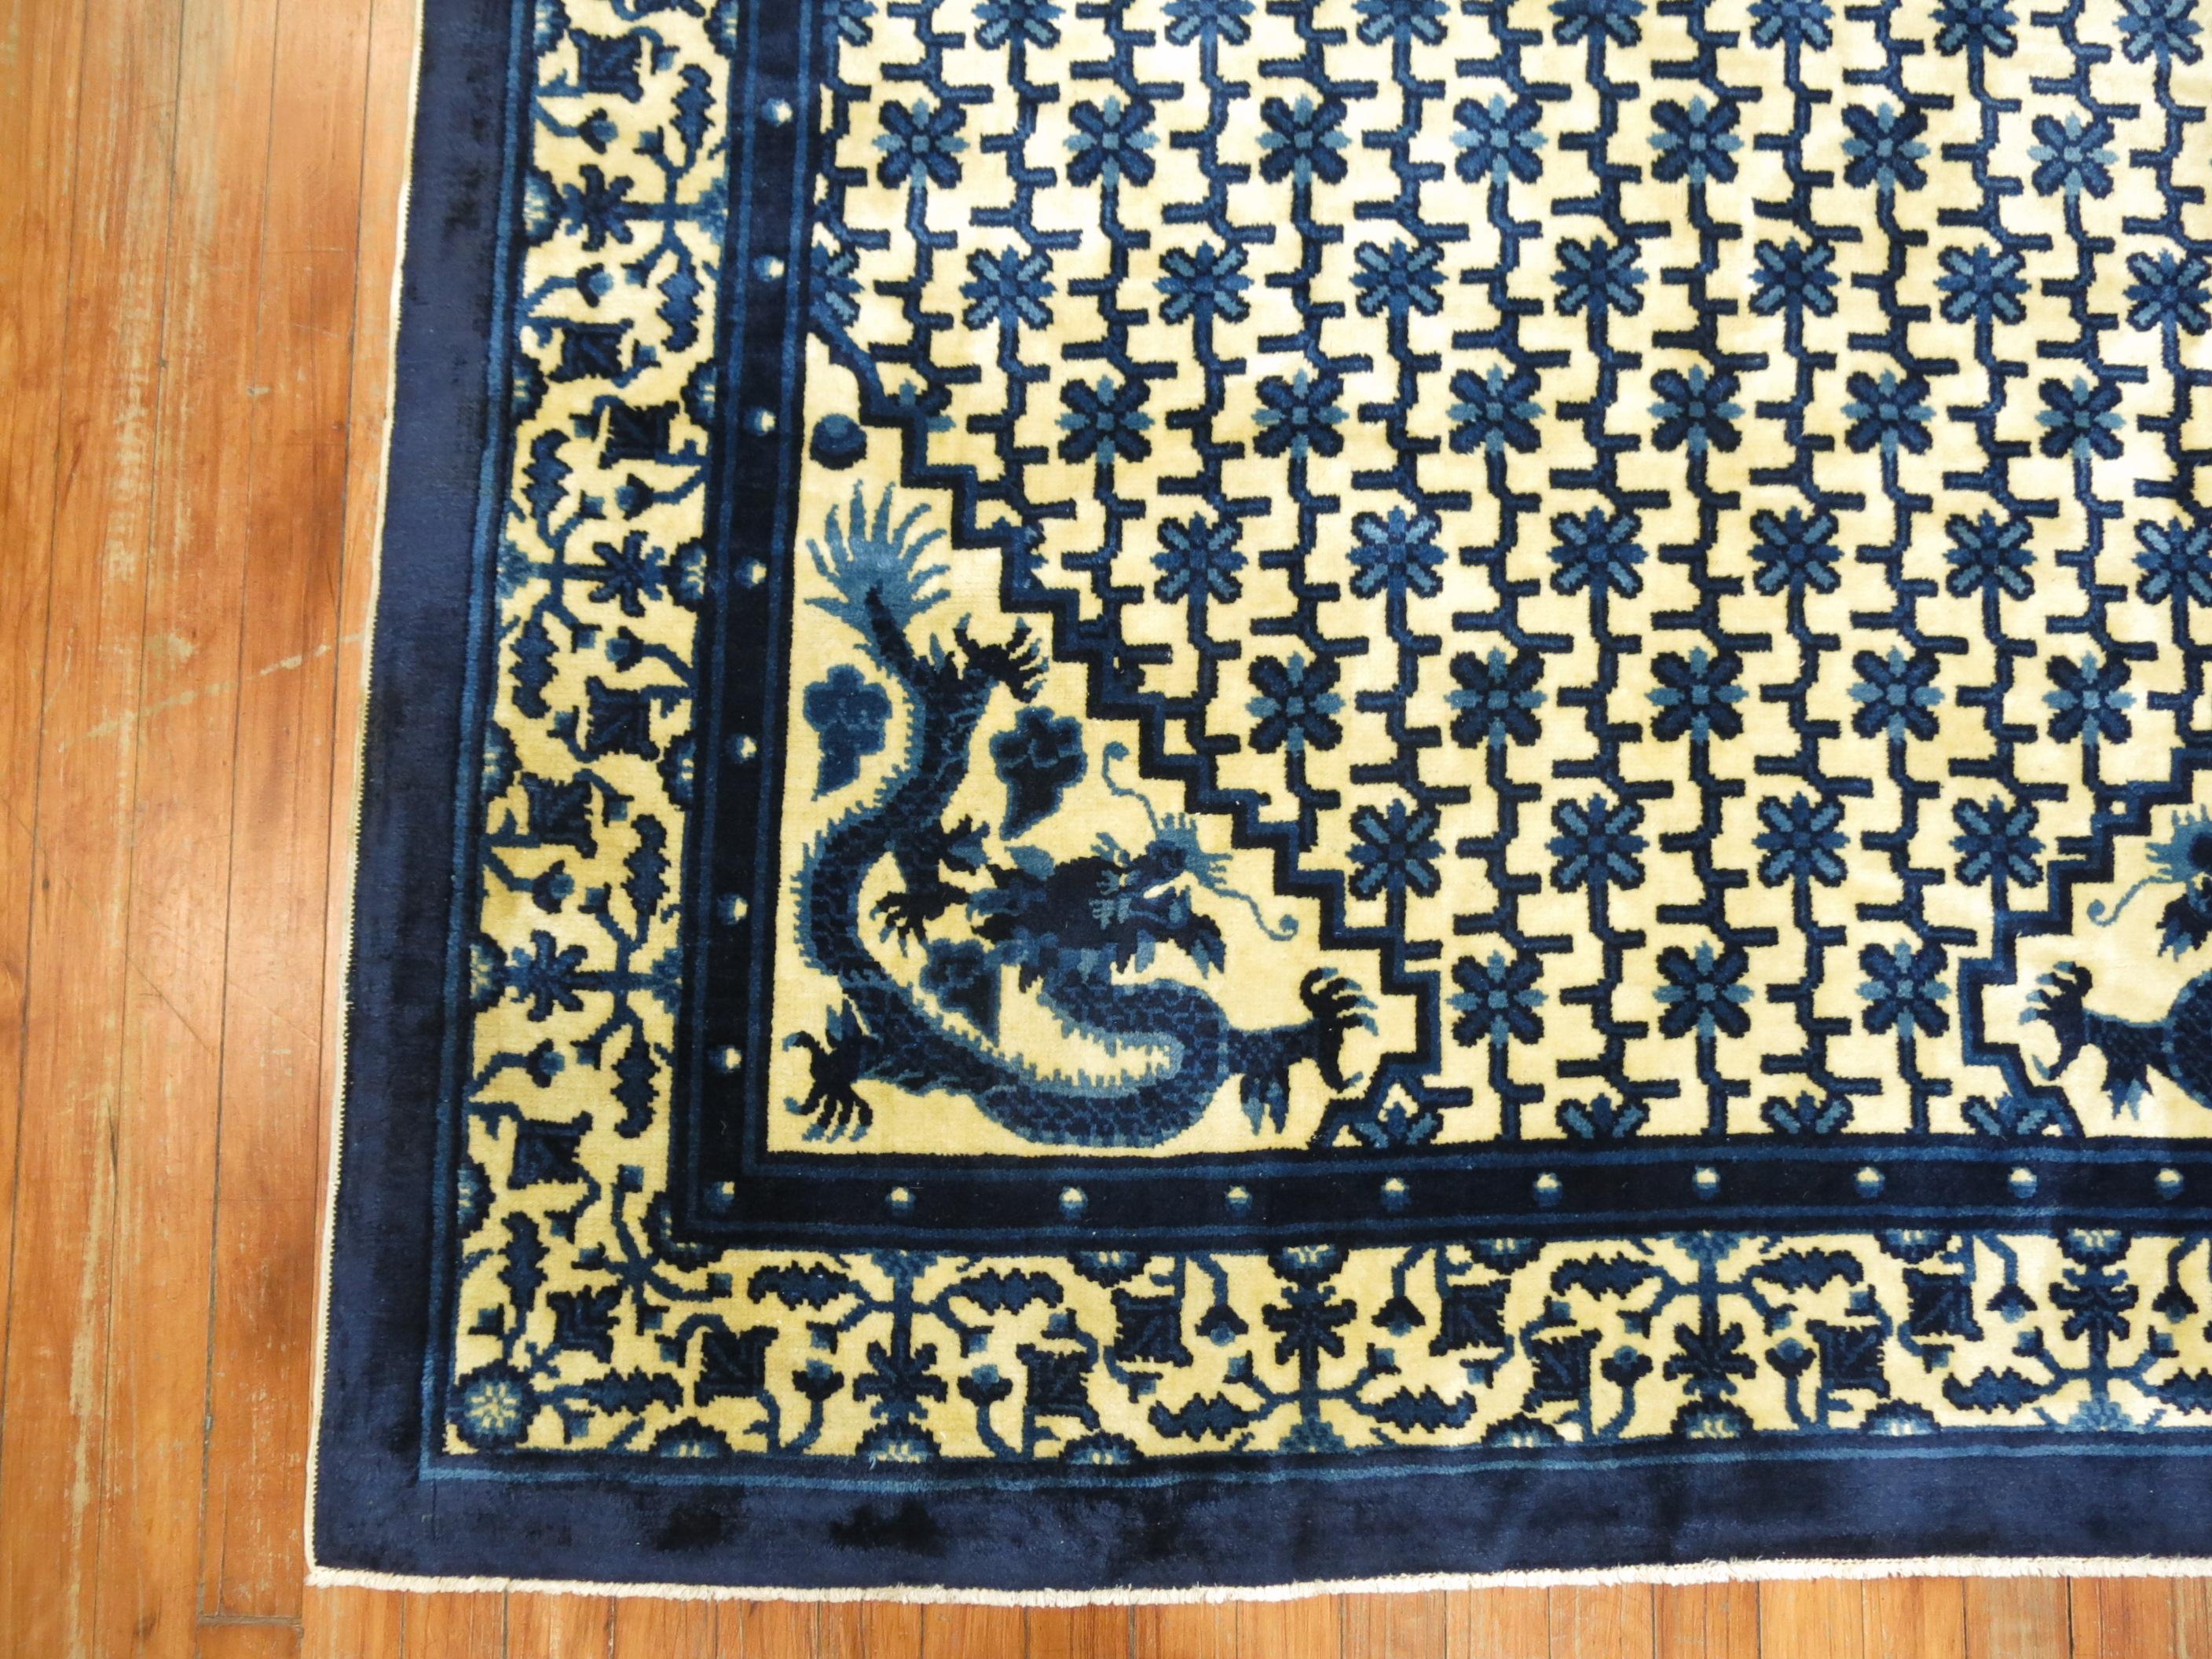 Vintage Chinese animal dragon rug in excellent medium even pile condition on creamy yellow colored ground.

Measures: 5' x 8'.